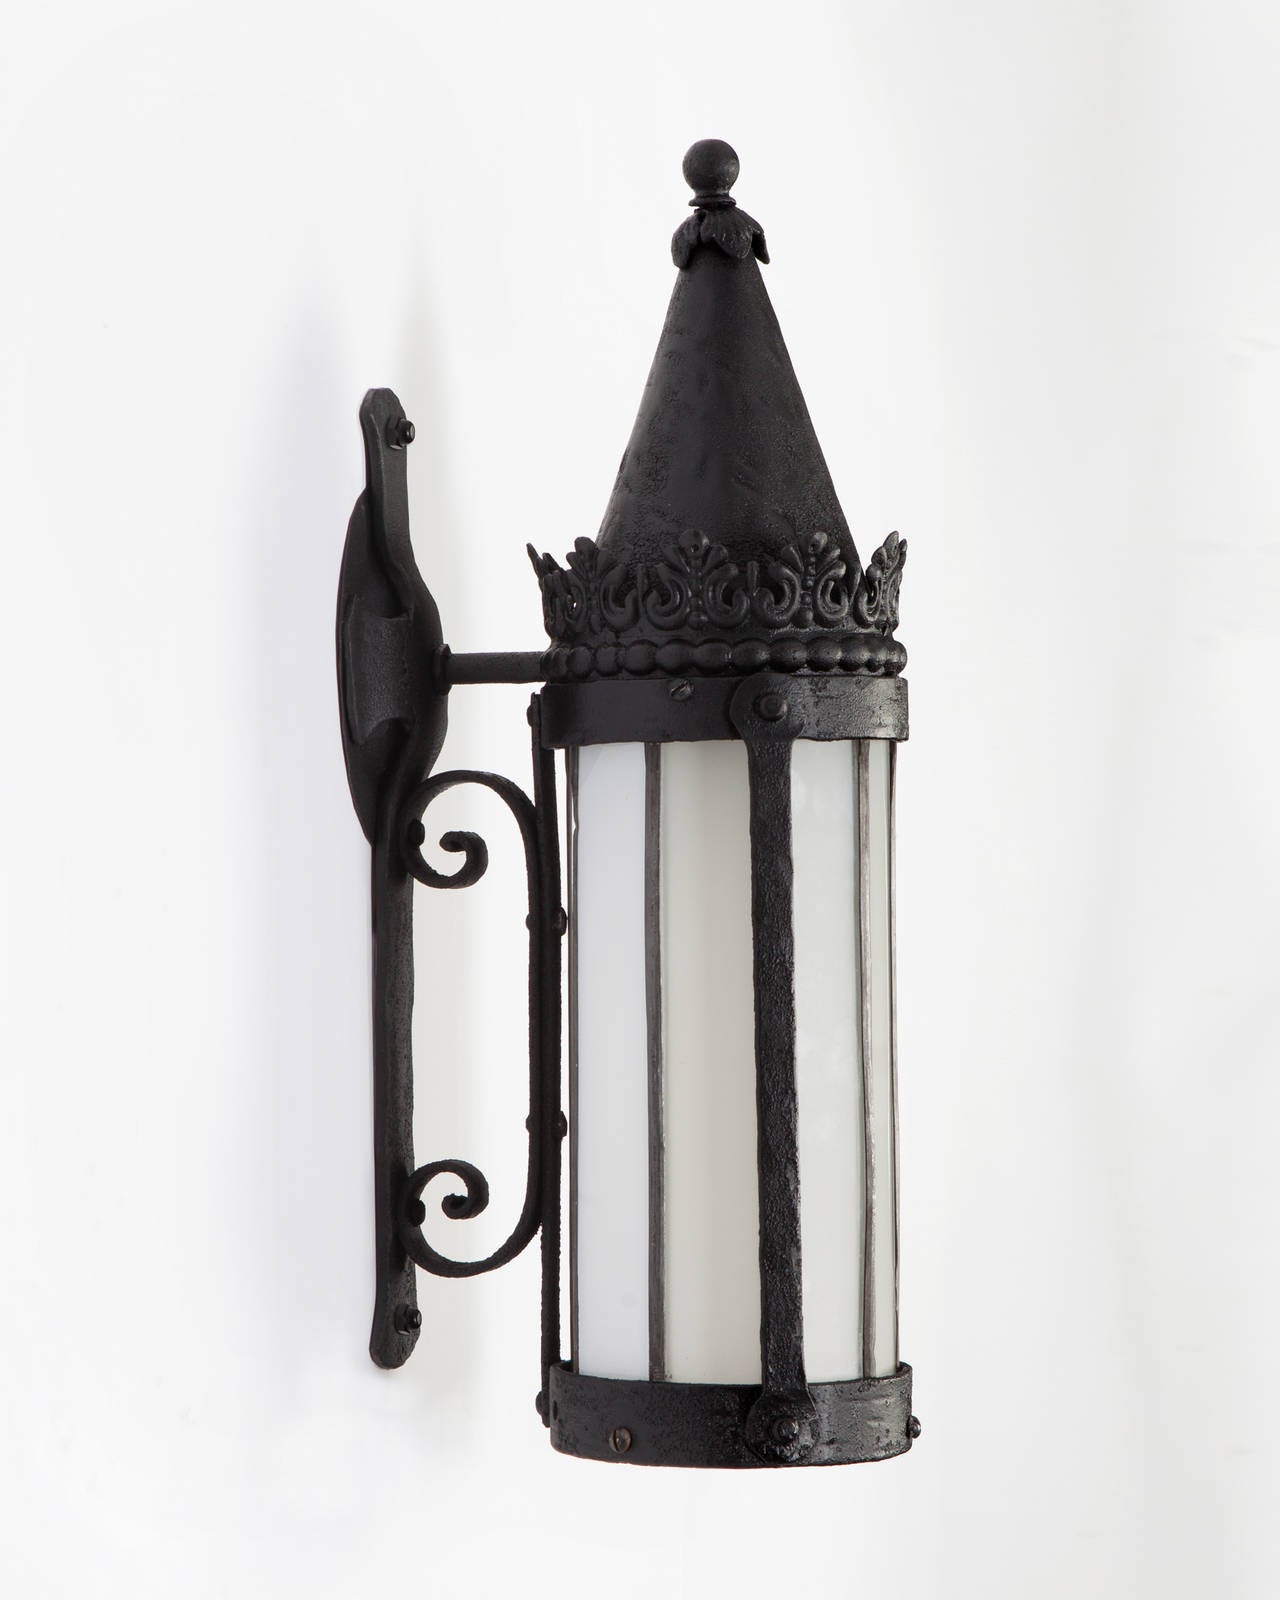 AEX0581

Circa 1920
A pair of wrought iron exterior wall lanterns with cylindrical leaded opaline glass shades, in their original weathered black paint finish. Due to the antique nature of this fixture, there may be some nicks or imperfections in